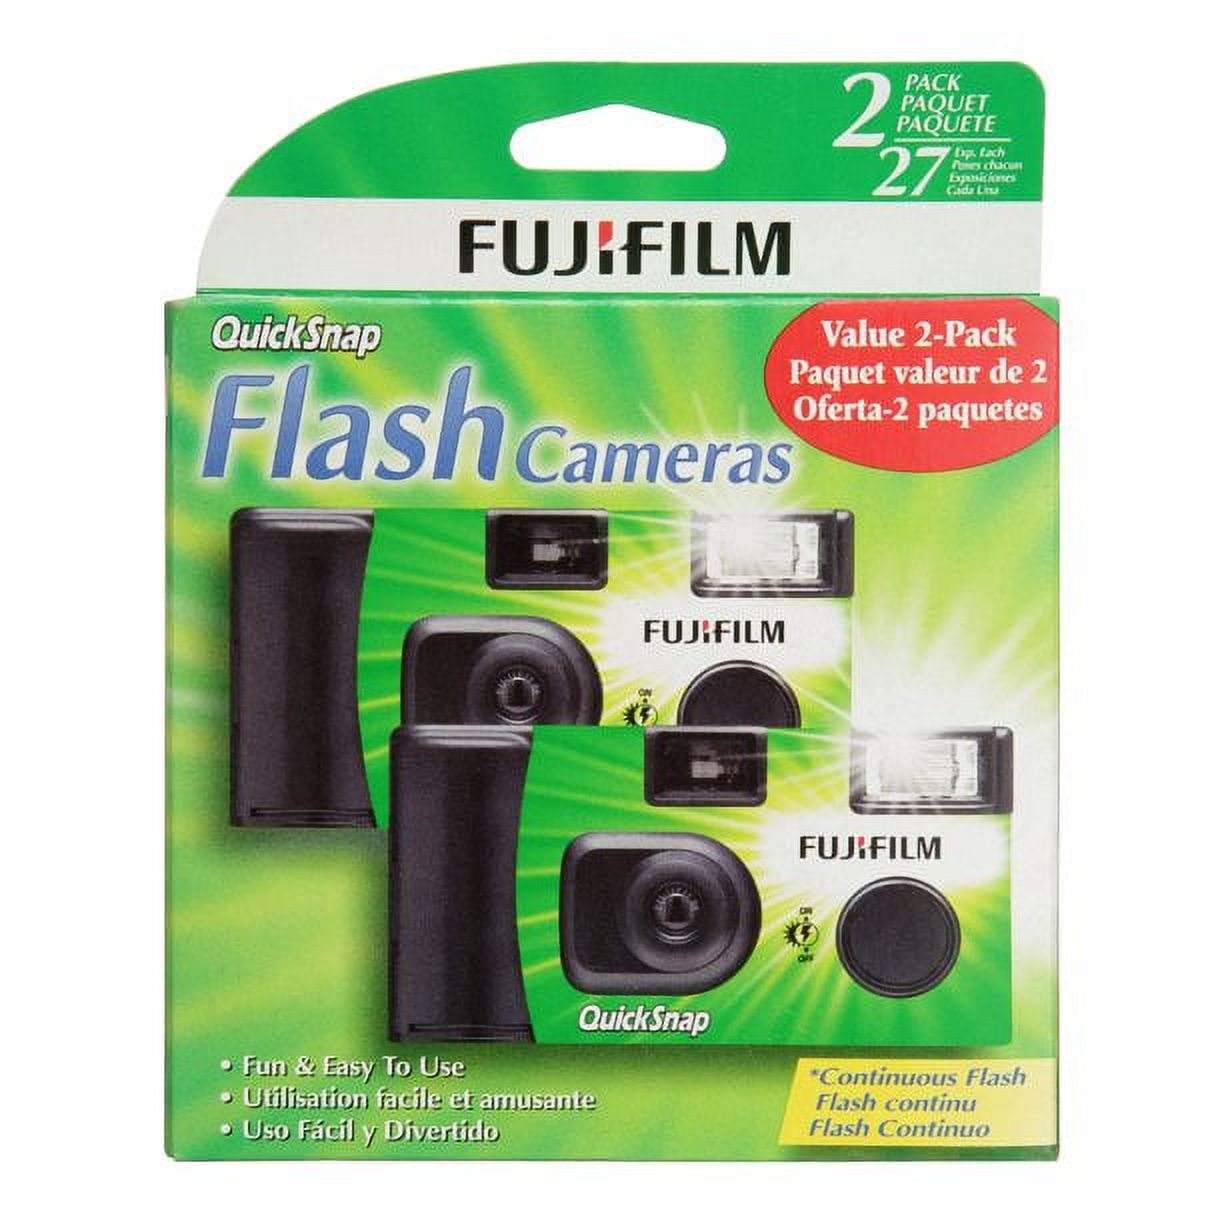 Fujifilm QuickSnap One Time Use 35mm Camera with Flash, 2 Pack - image 1 of 4